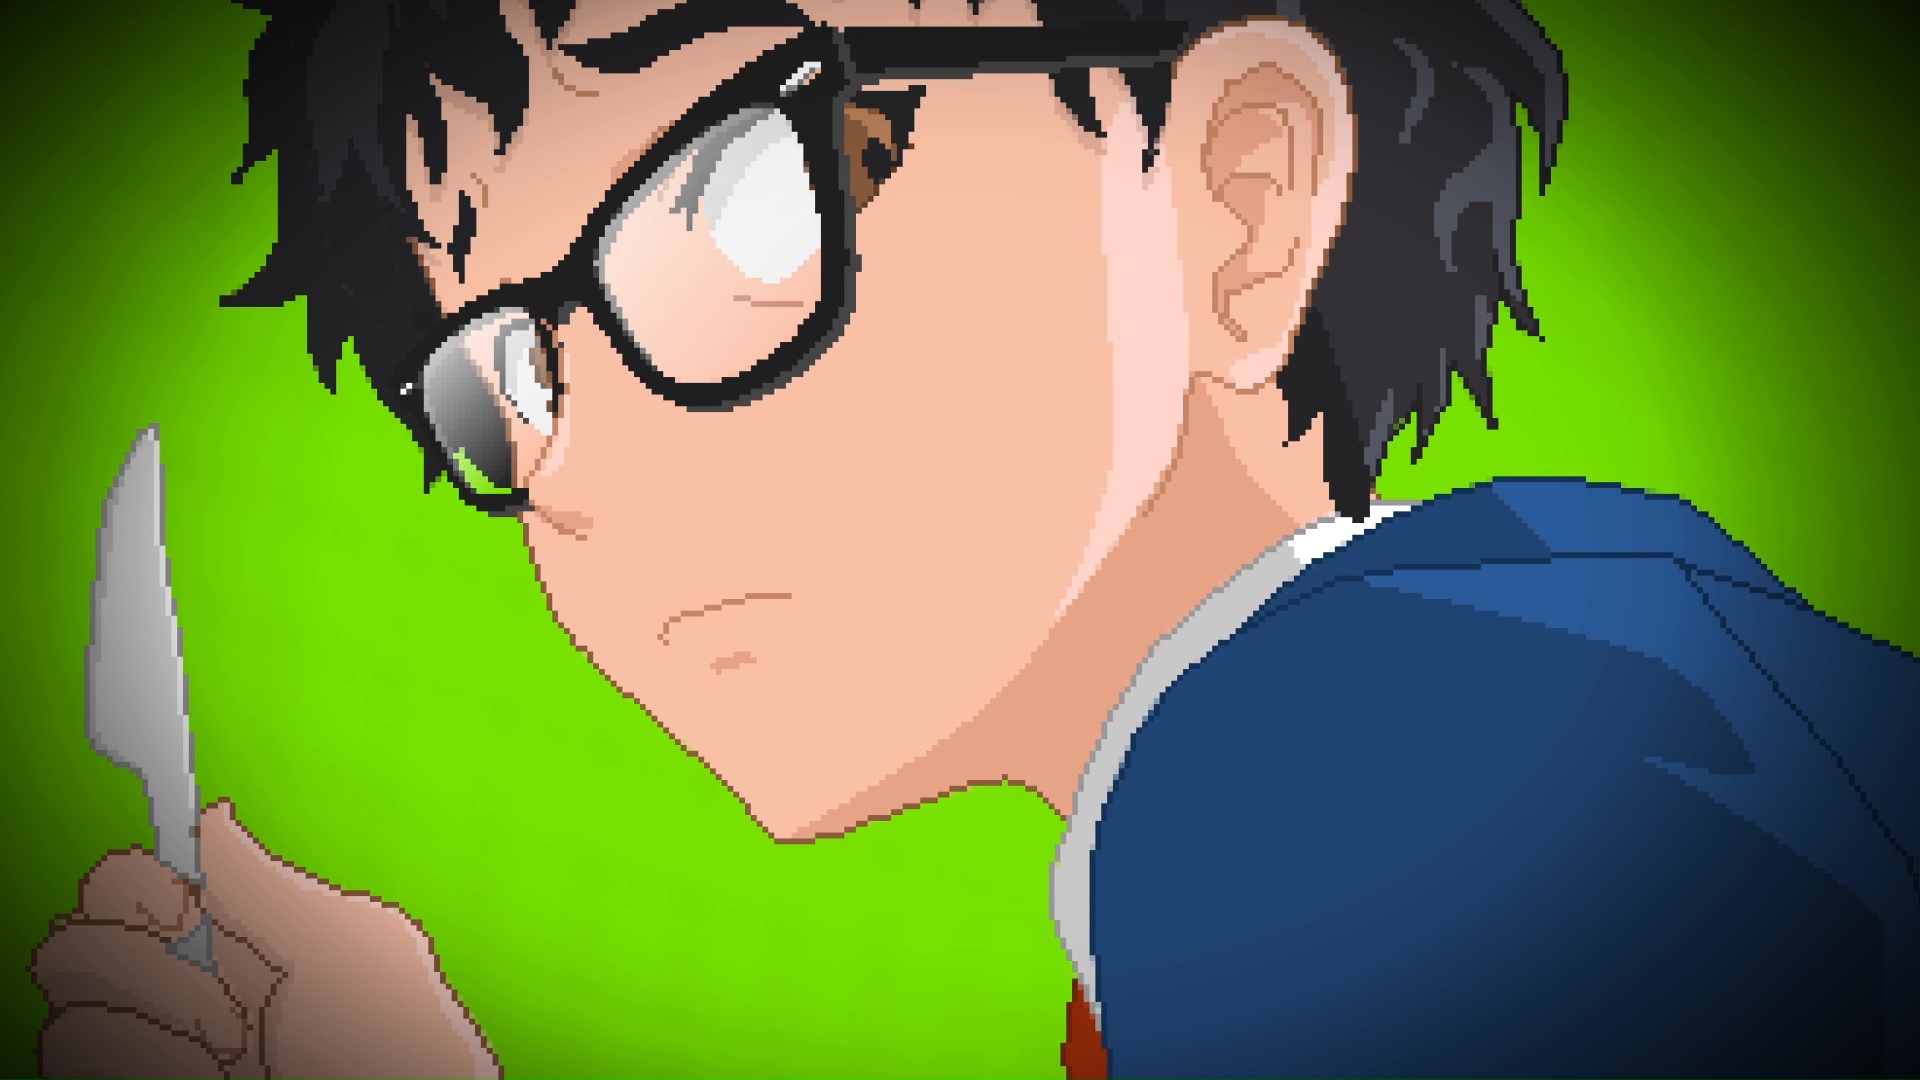 Yuppie Psycho is coming to Xbox and PlayStation in summer 2022